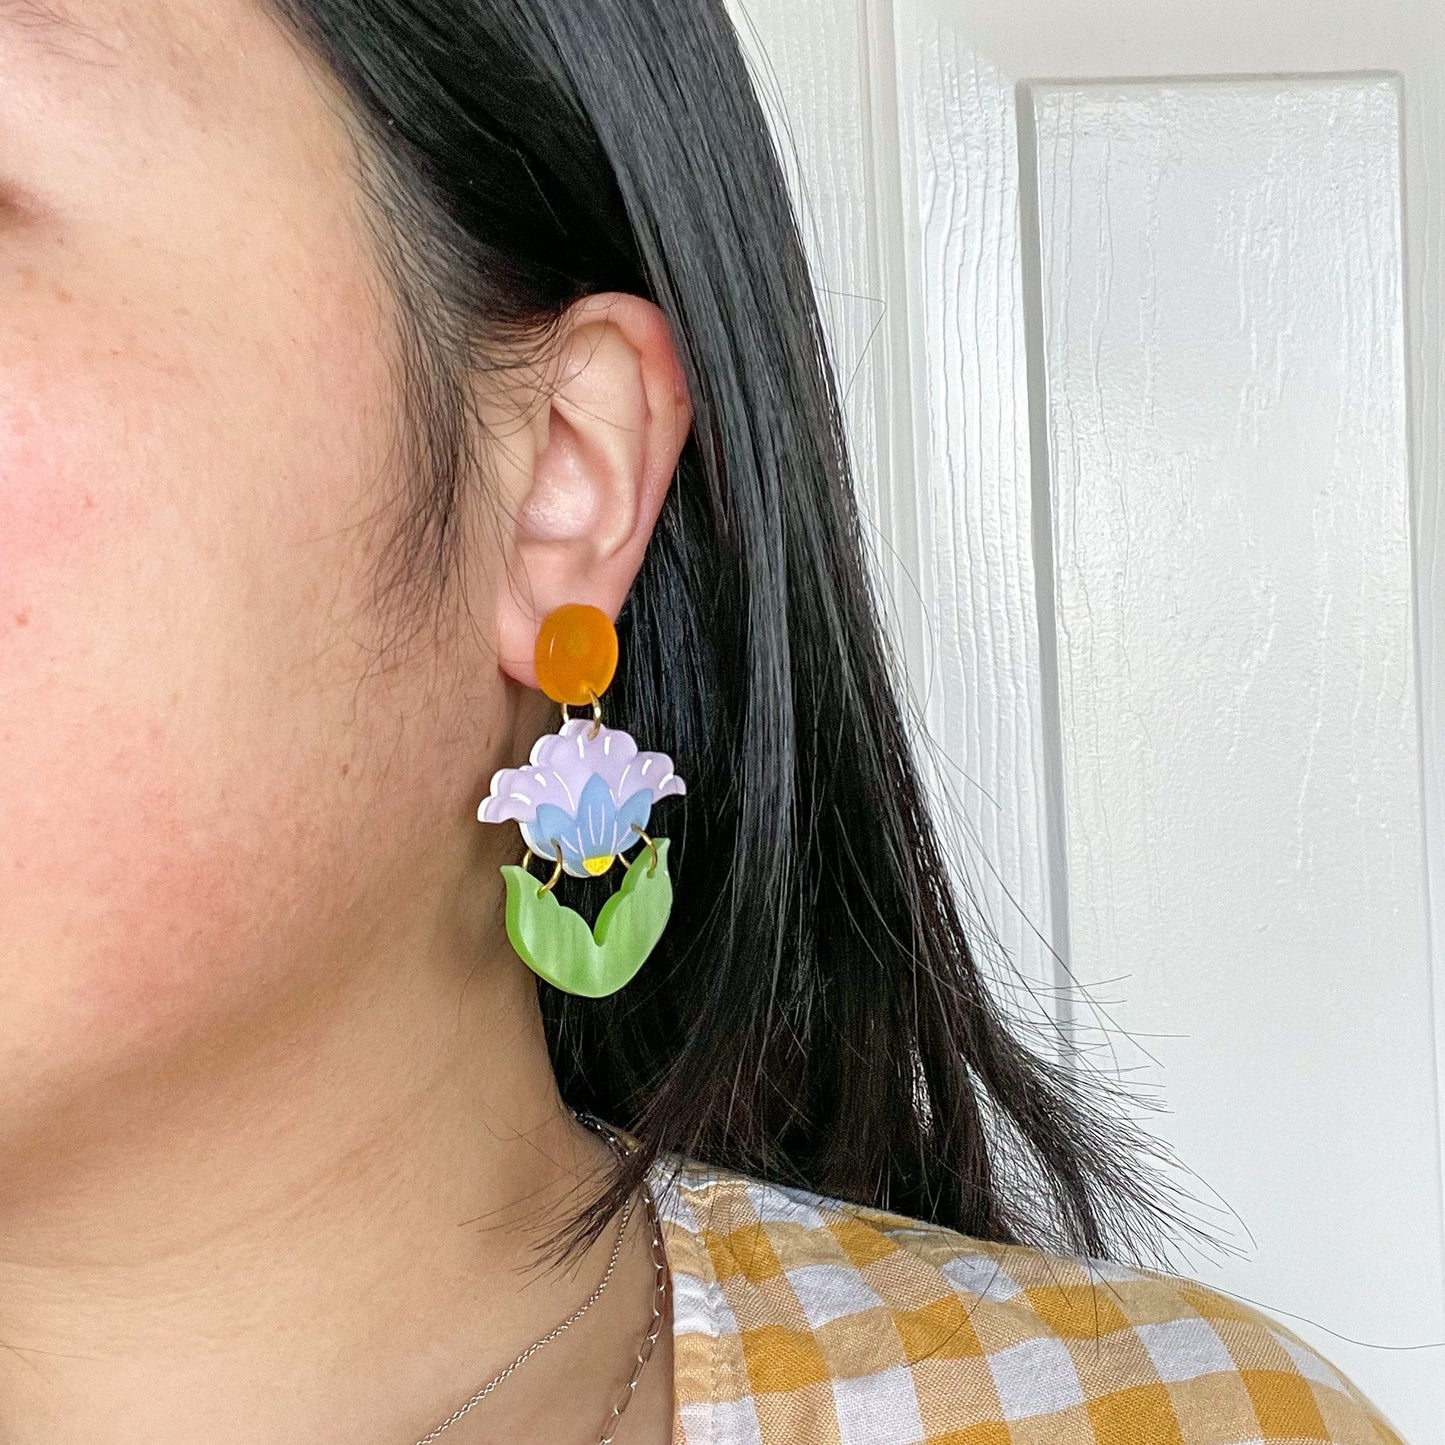 Mismatch Blooming Daisy//Flower Earring//Spring Flower Earrings//Statement Earring//Acrylic Earring//Daisy Earrings//Cute Earrings